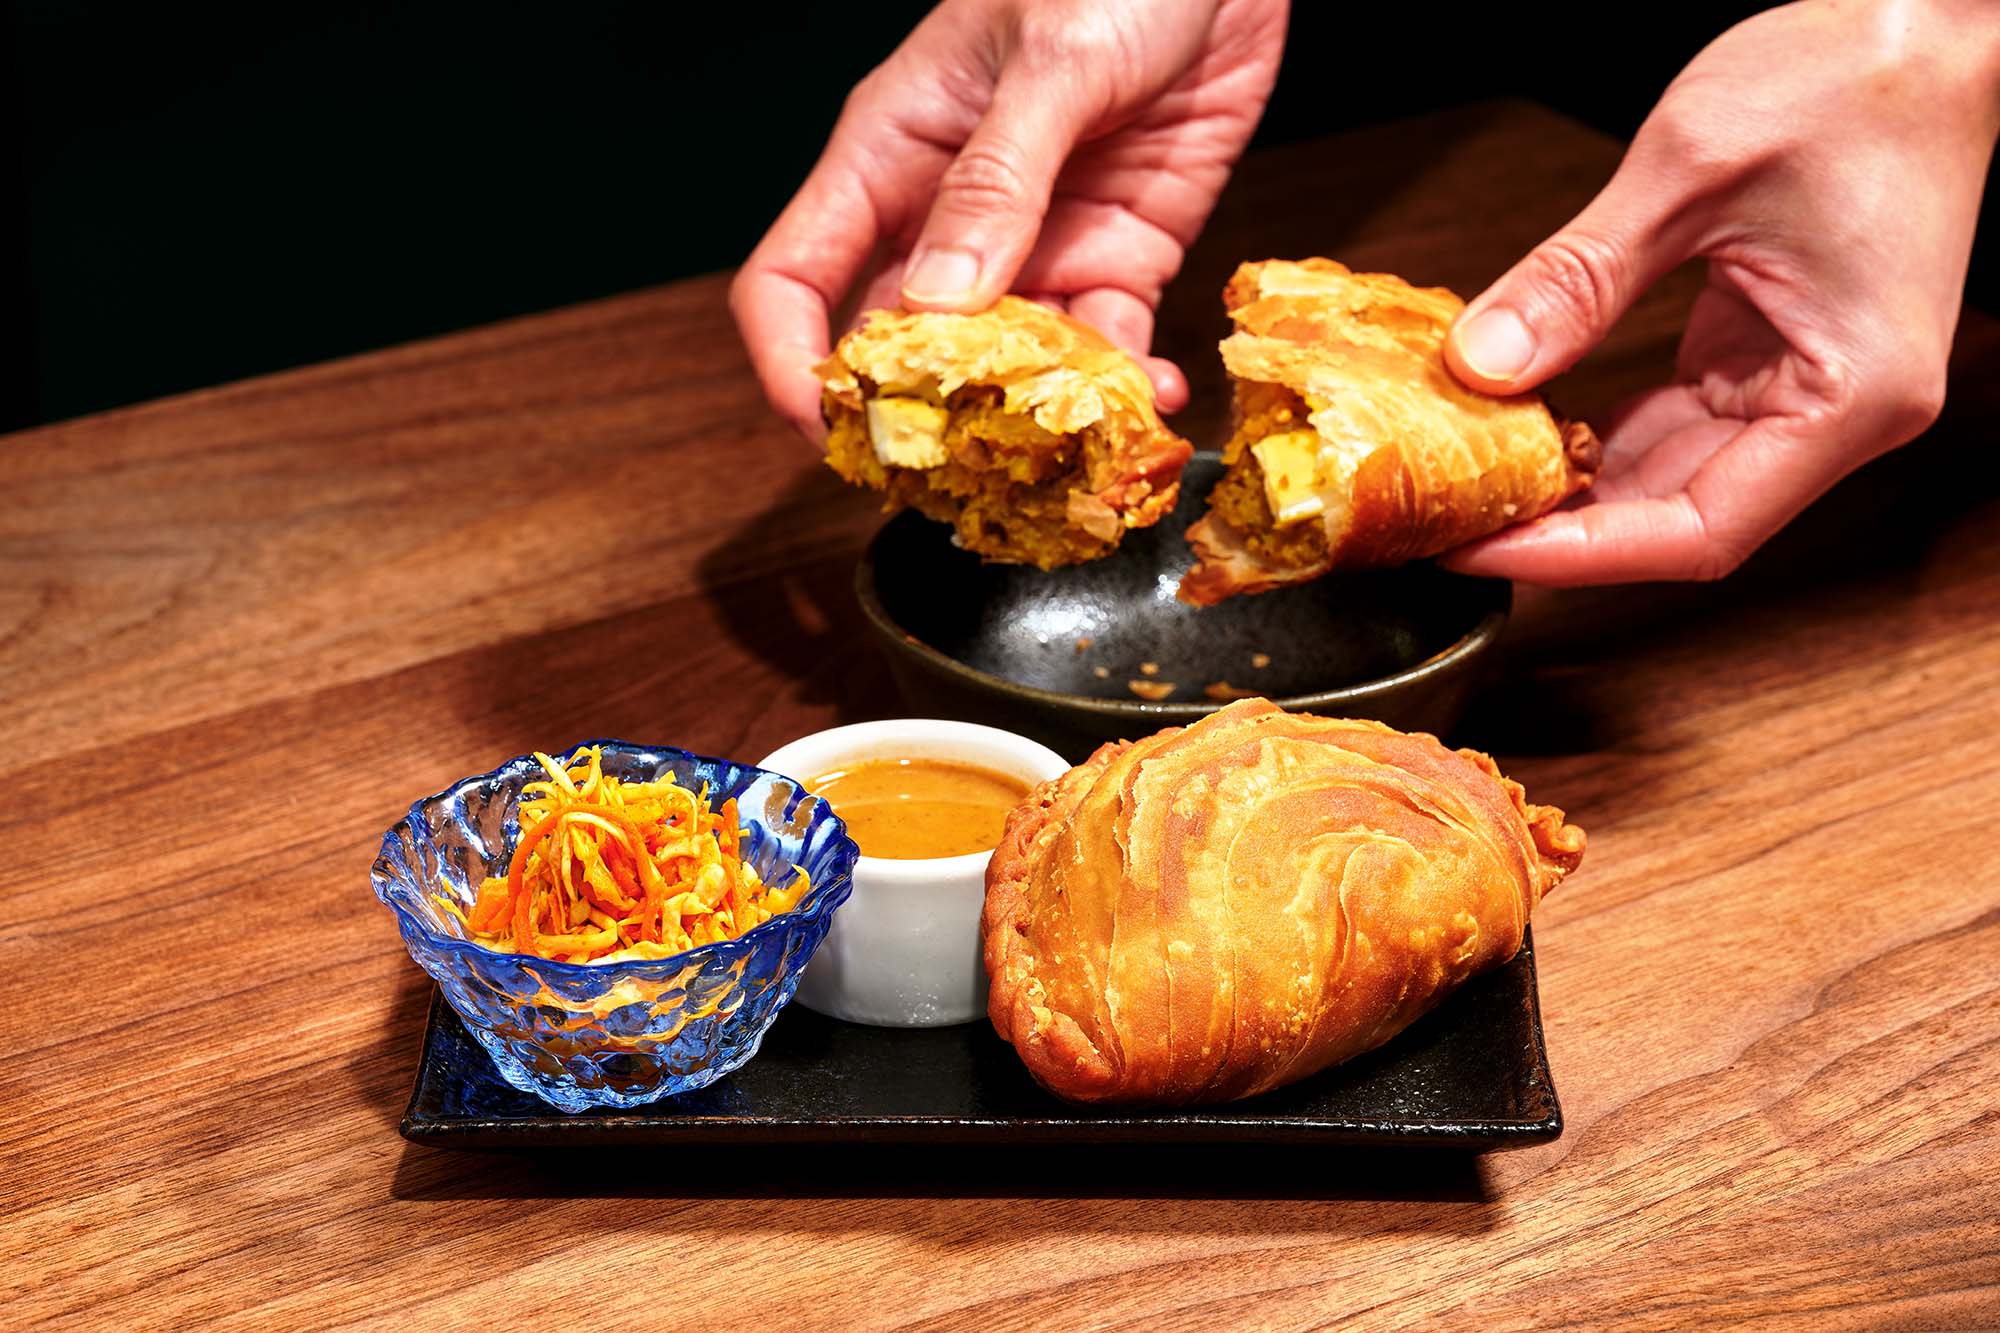 Two hands break apart a curry puff.